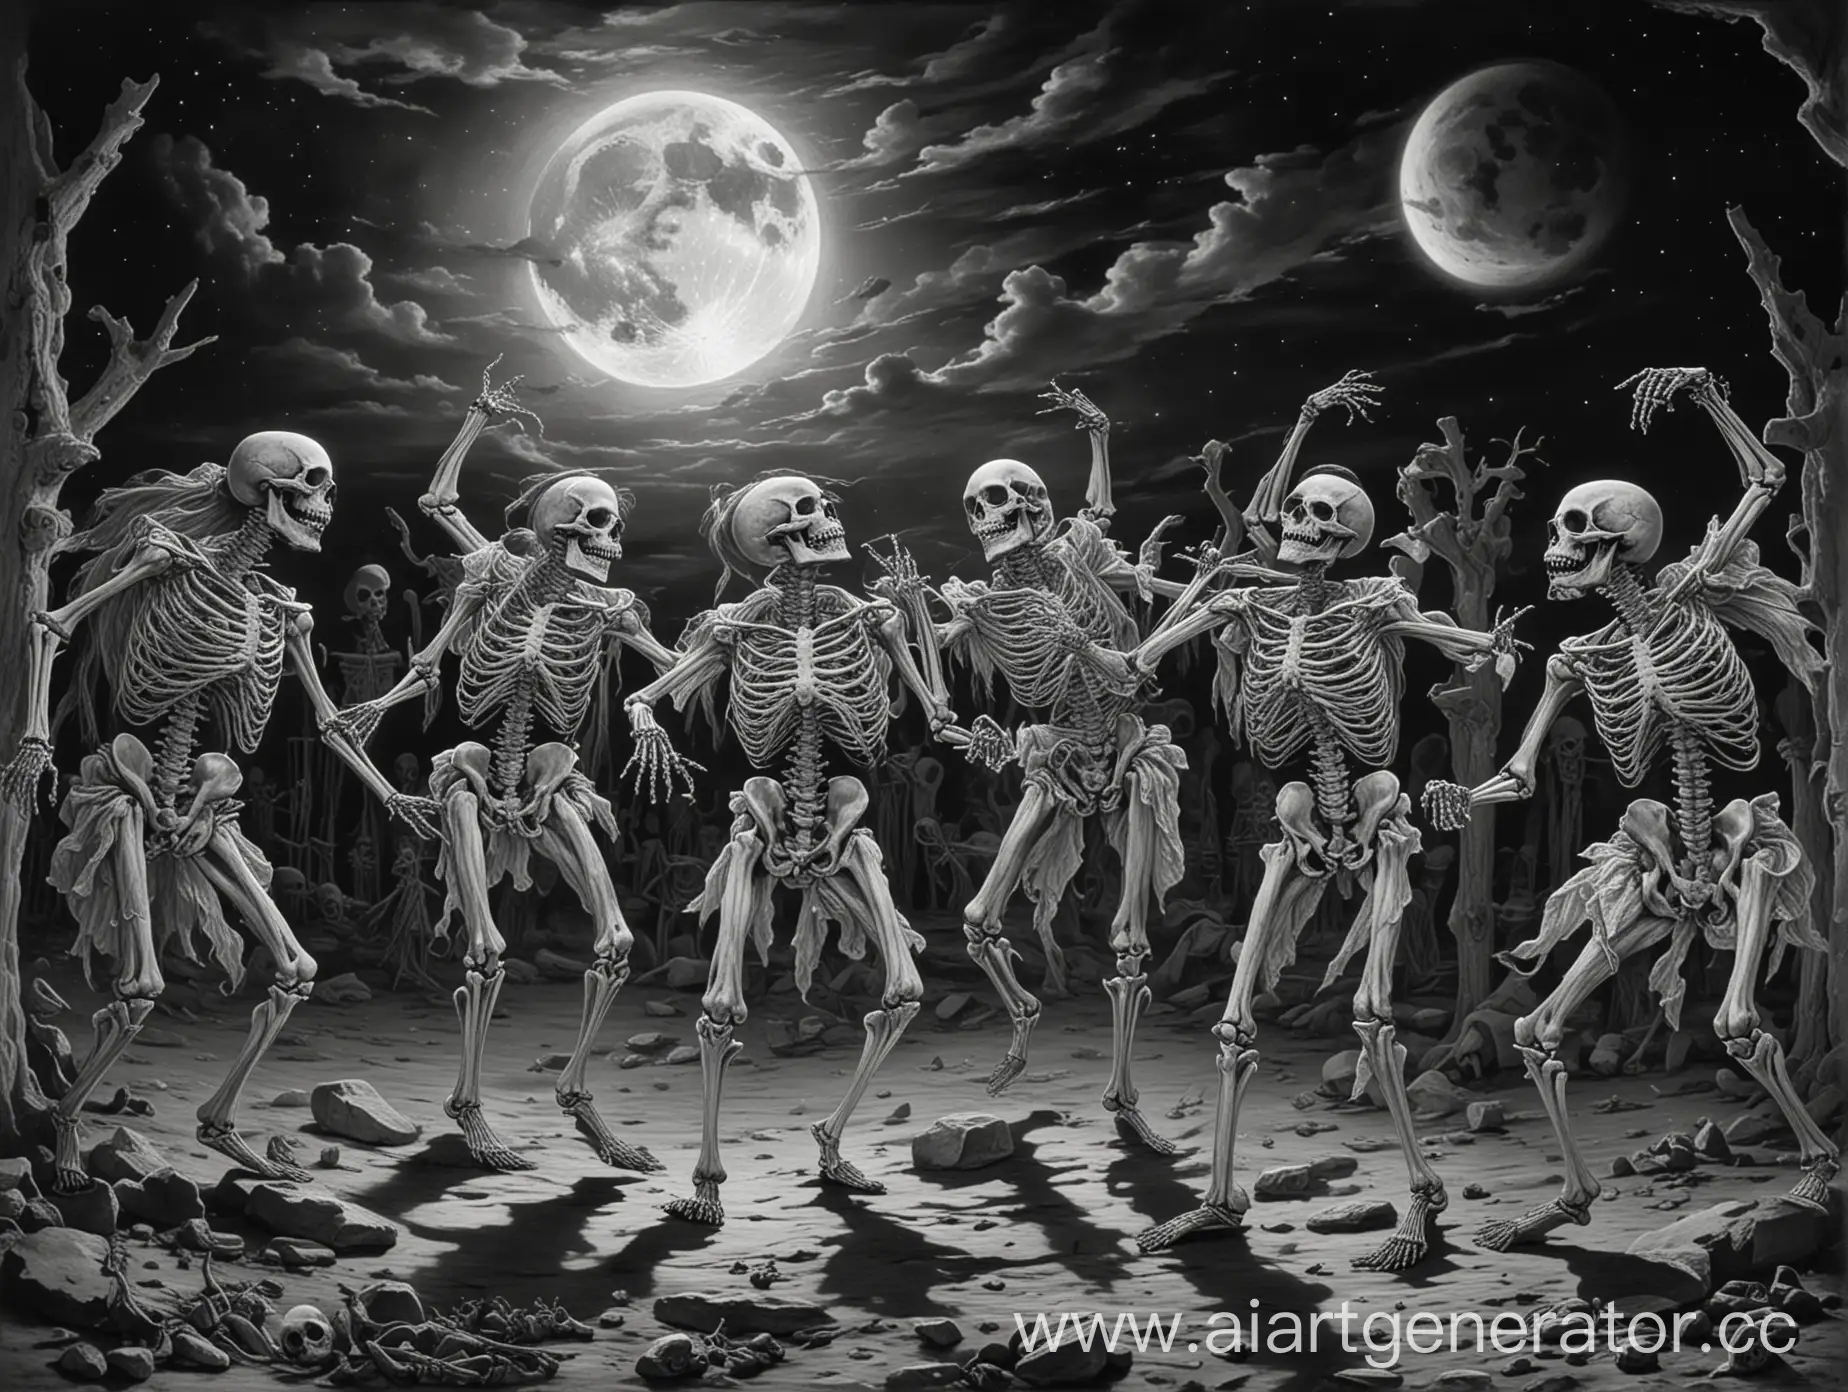 Picture, black -white, a shabash of dancing haravods, skeletons under the full moon